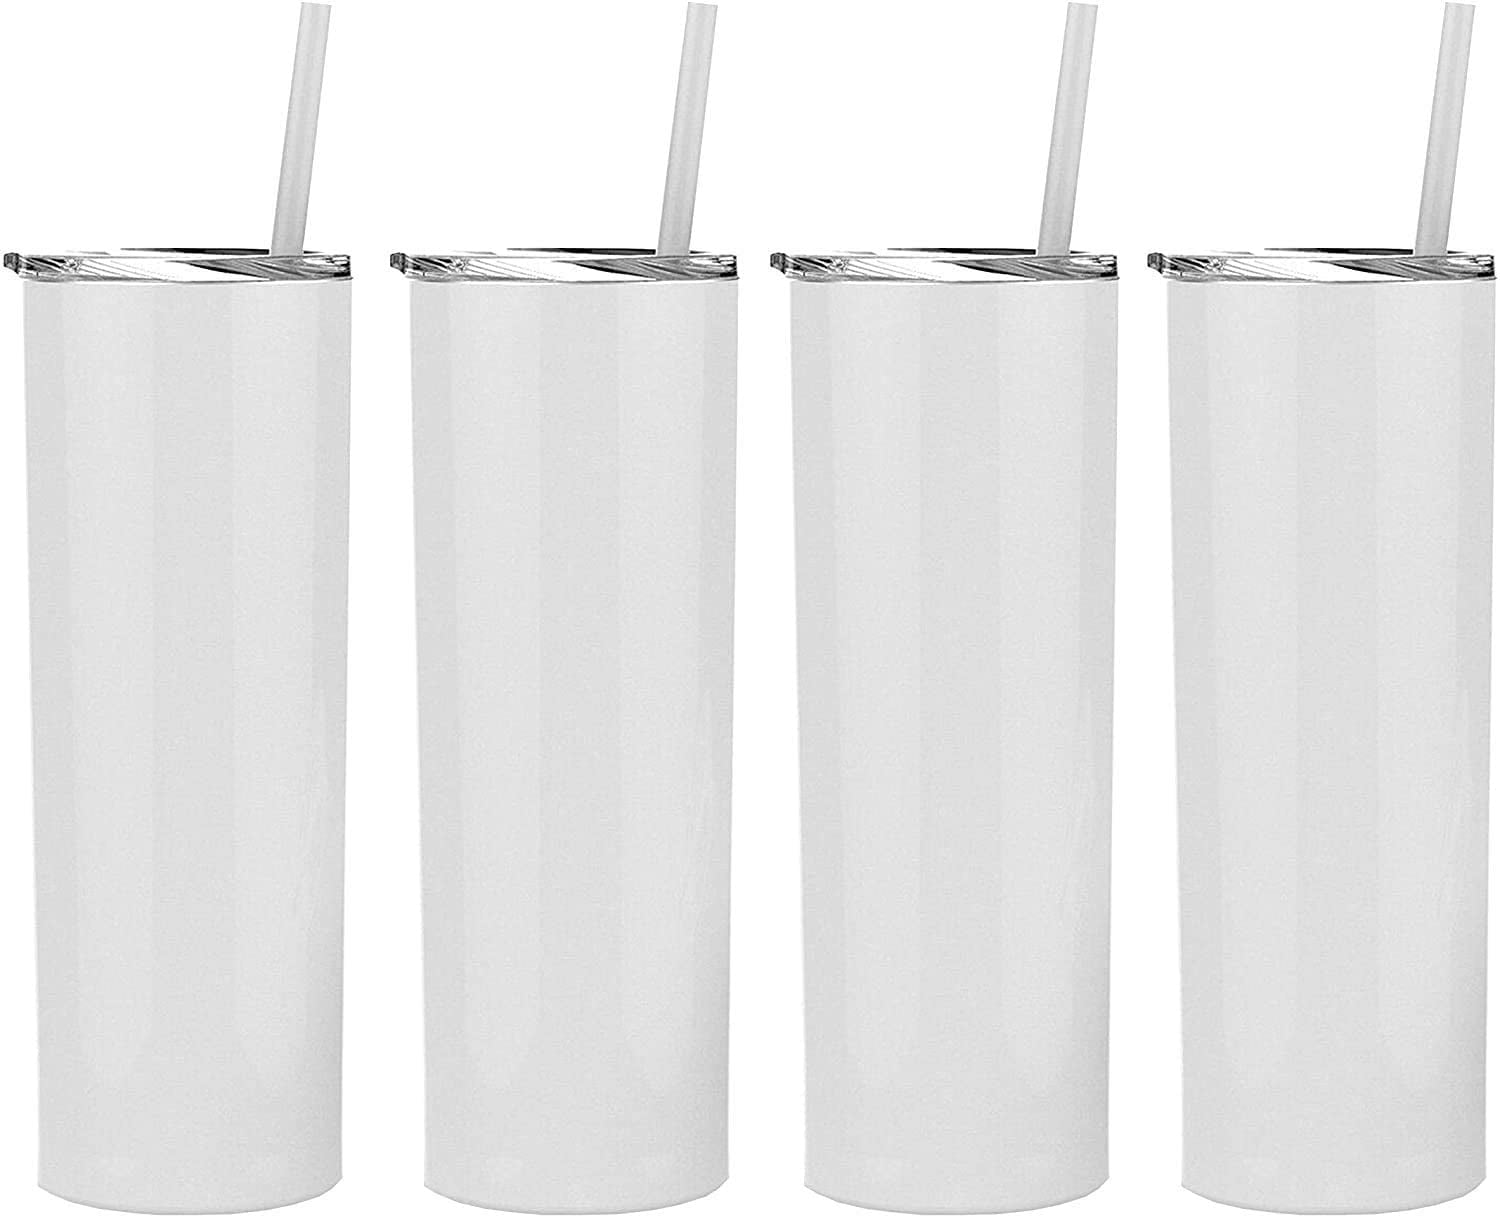 XccMe 12 oz Skinny Sublimation Blanks,Stainless Steel Straight Tumblers with Shrink Wrap Films,4 PACK Double Wall Vacuum Insulated Mugs for DIY Gift White Coffee Beverages Tea